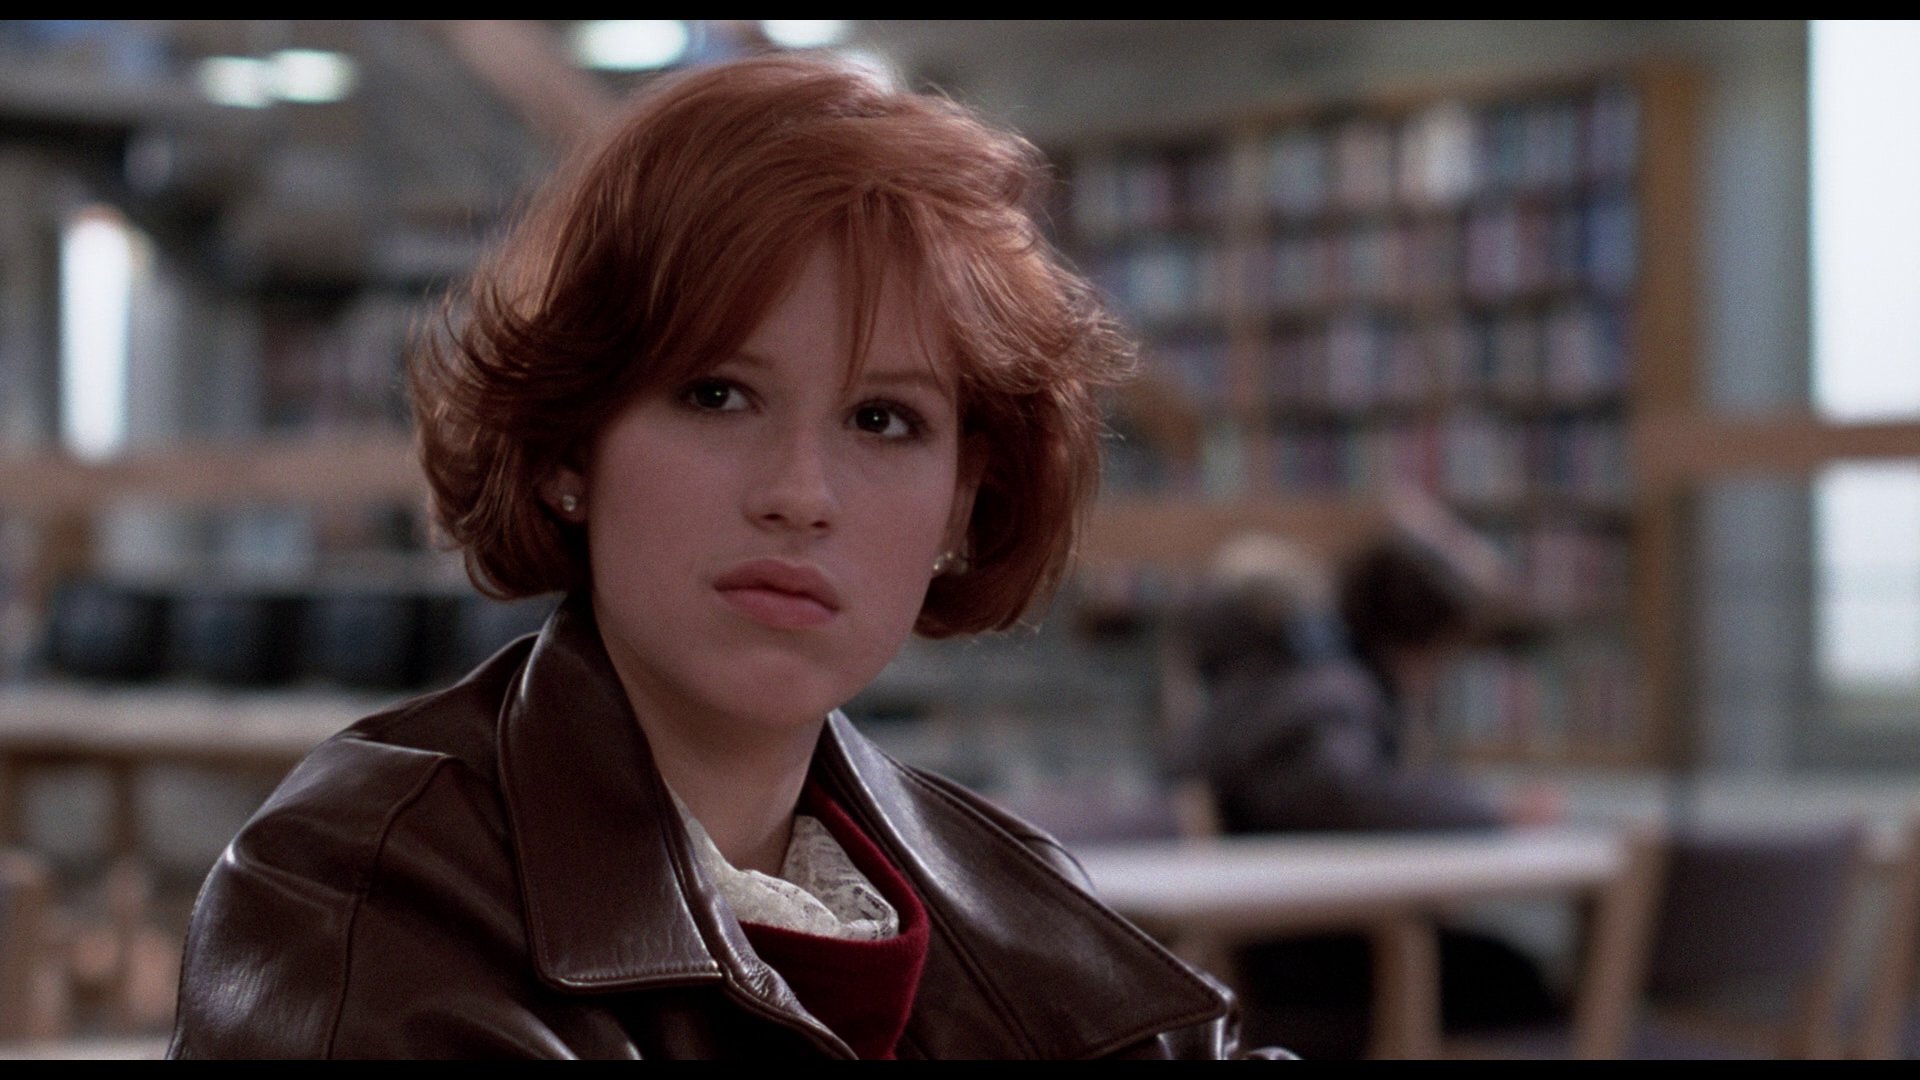 JPEG - Image for The Breakfast Club - 30th Anniversary Edition.